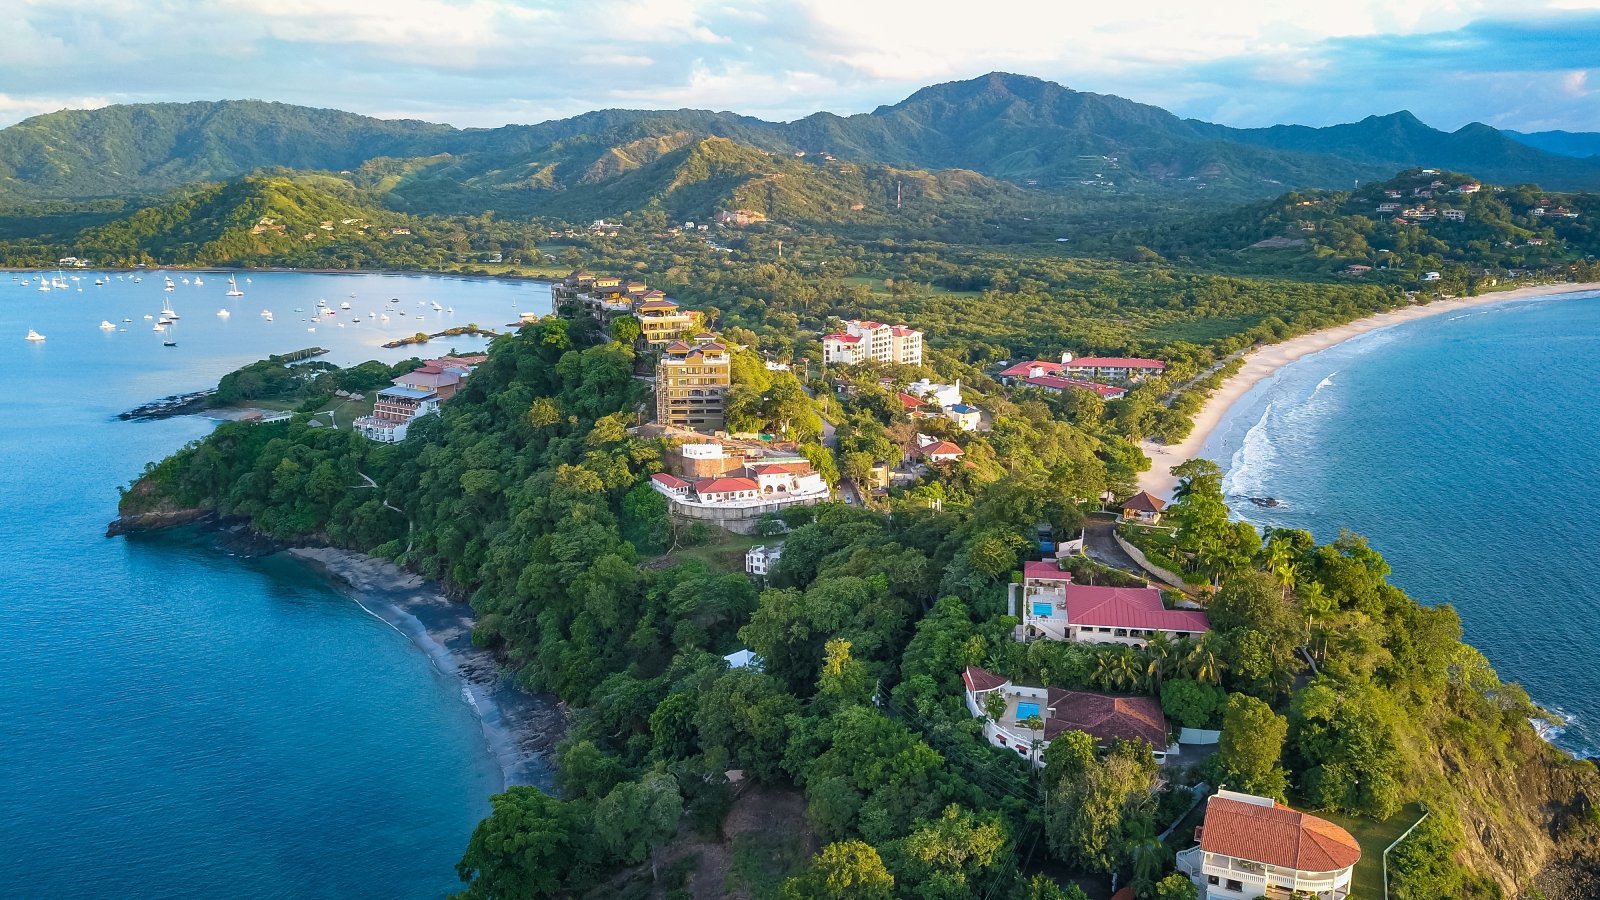 <p><span>Costa Rica’s “Pura Vida” lifestyle, breathtaking natural beauty, and affordable healthcare are easily accessible to retirees through its straightforward residency process, promising a serene and healthy retirement.</span></p>